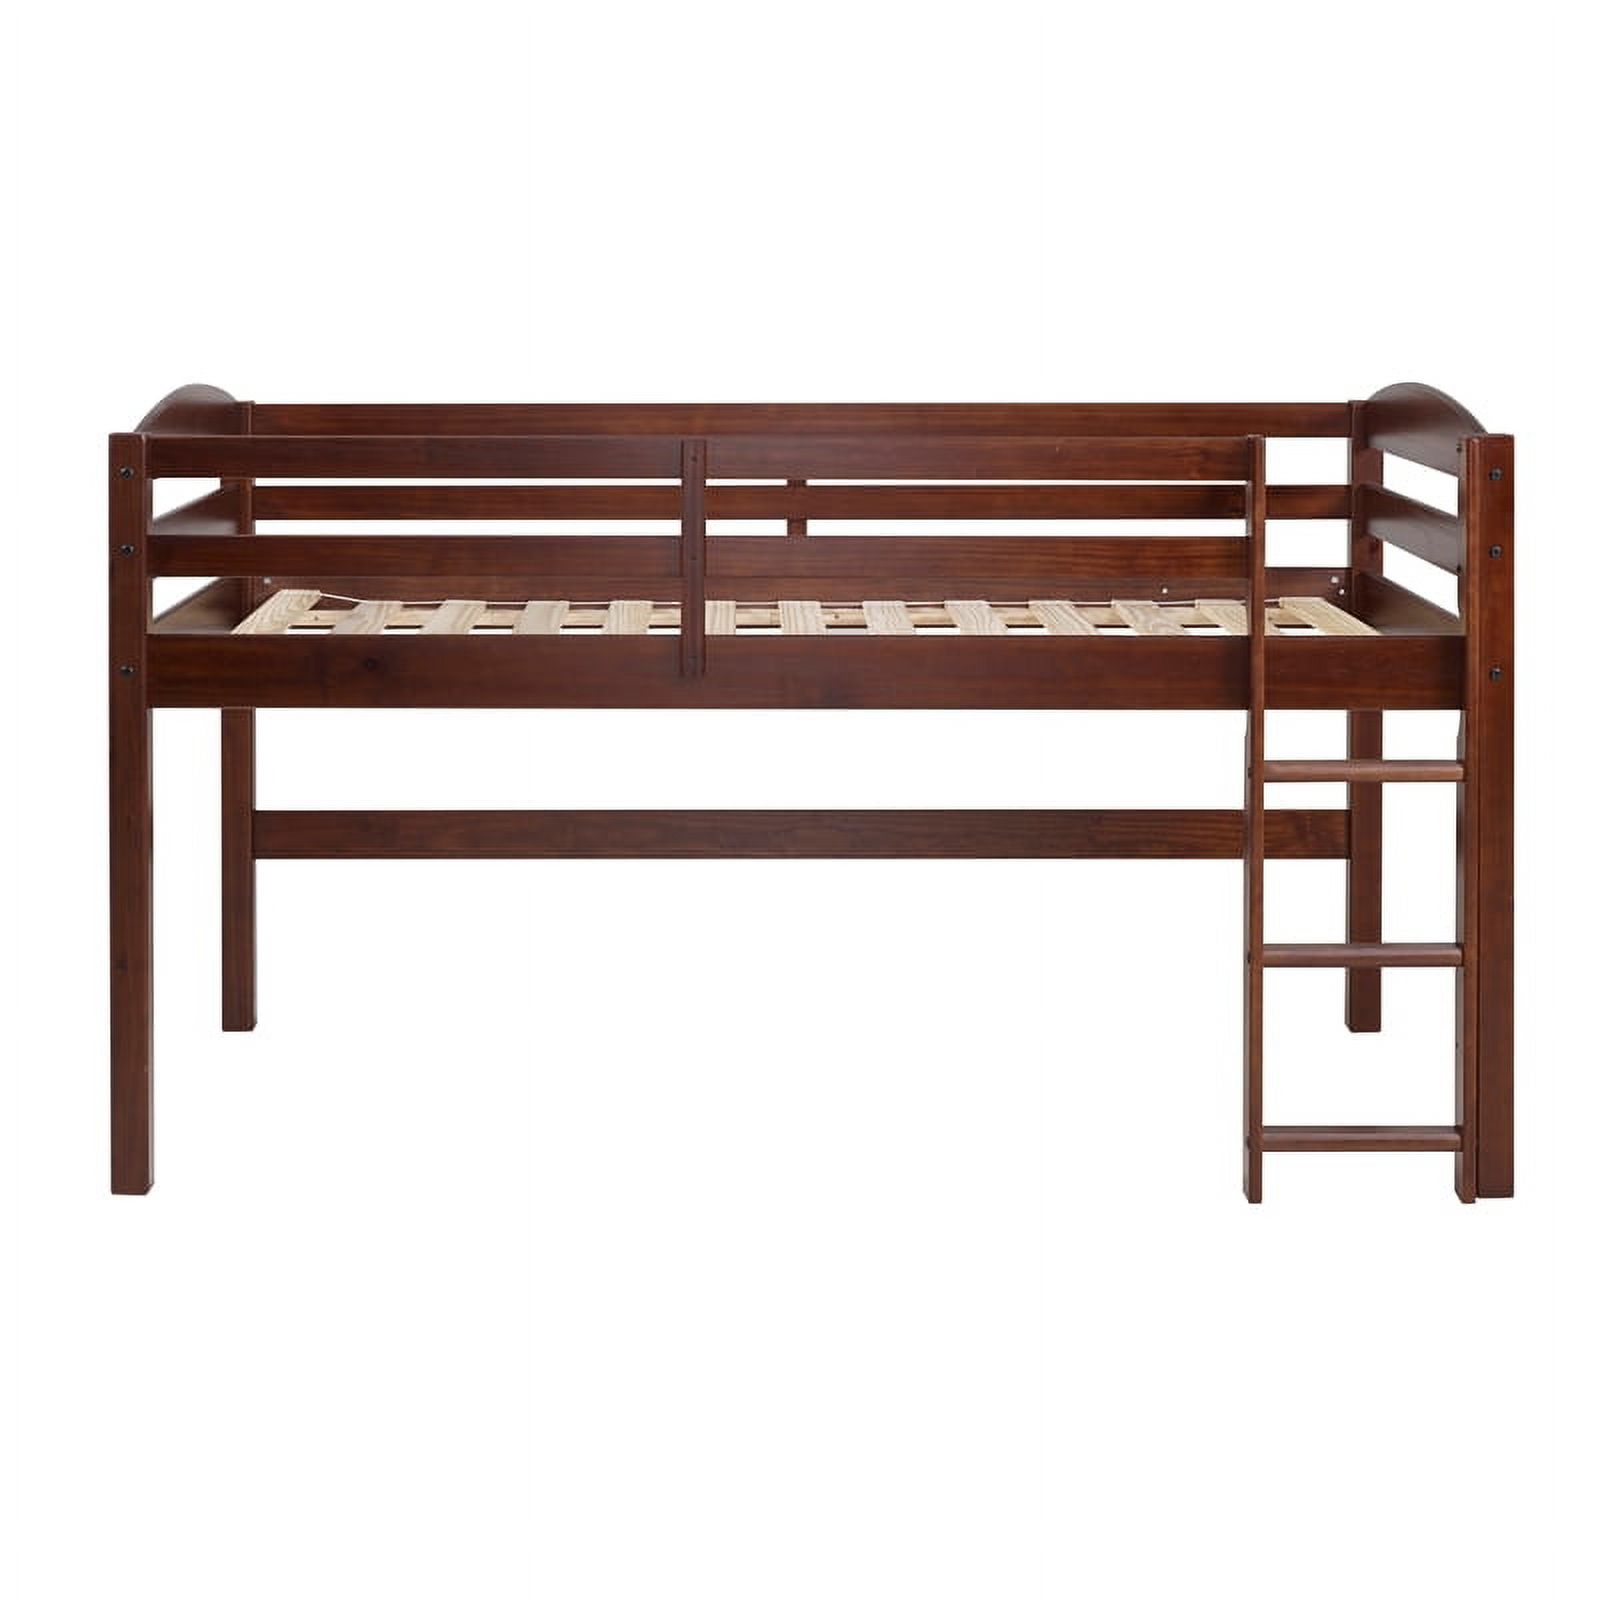 Pemberly Row Transitional Solid Wood Twin Low Loft Bed in Walnut Brown - image 3 of 10